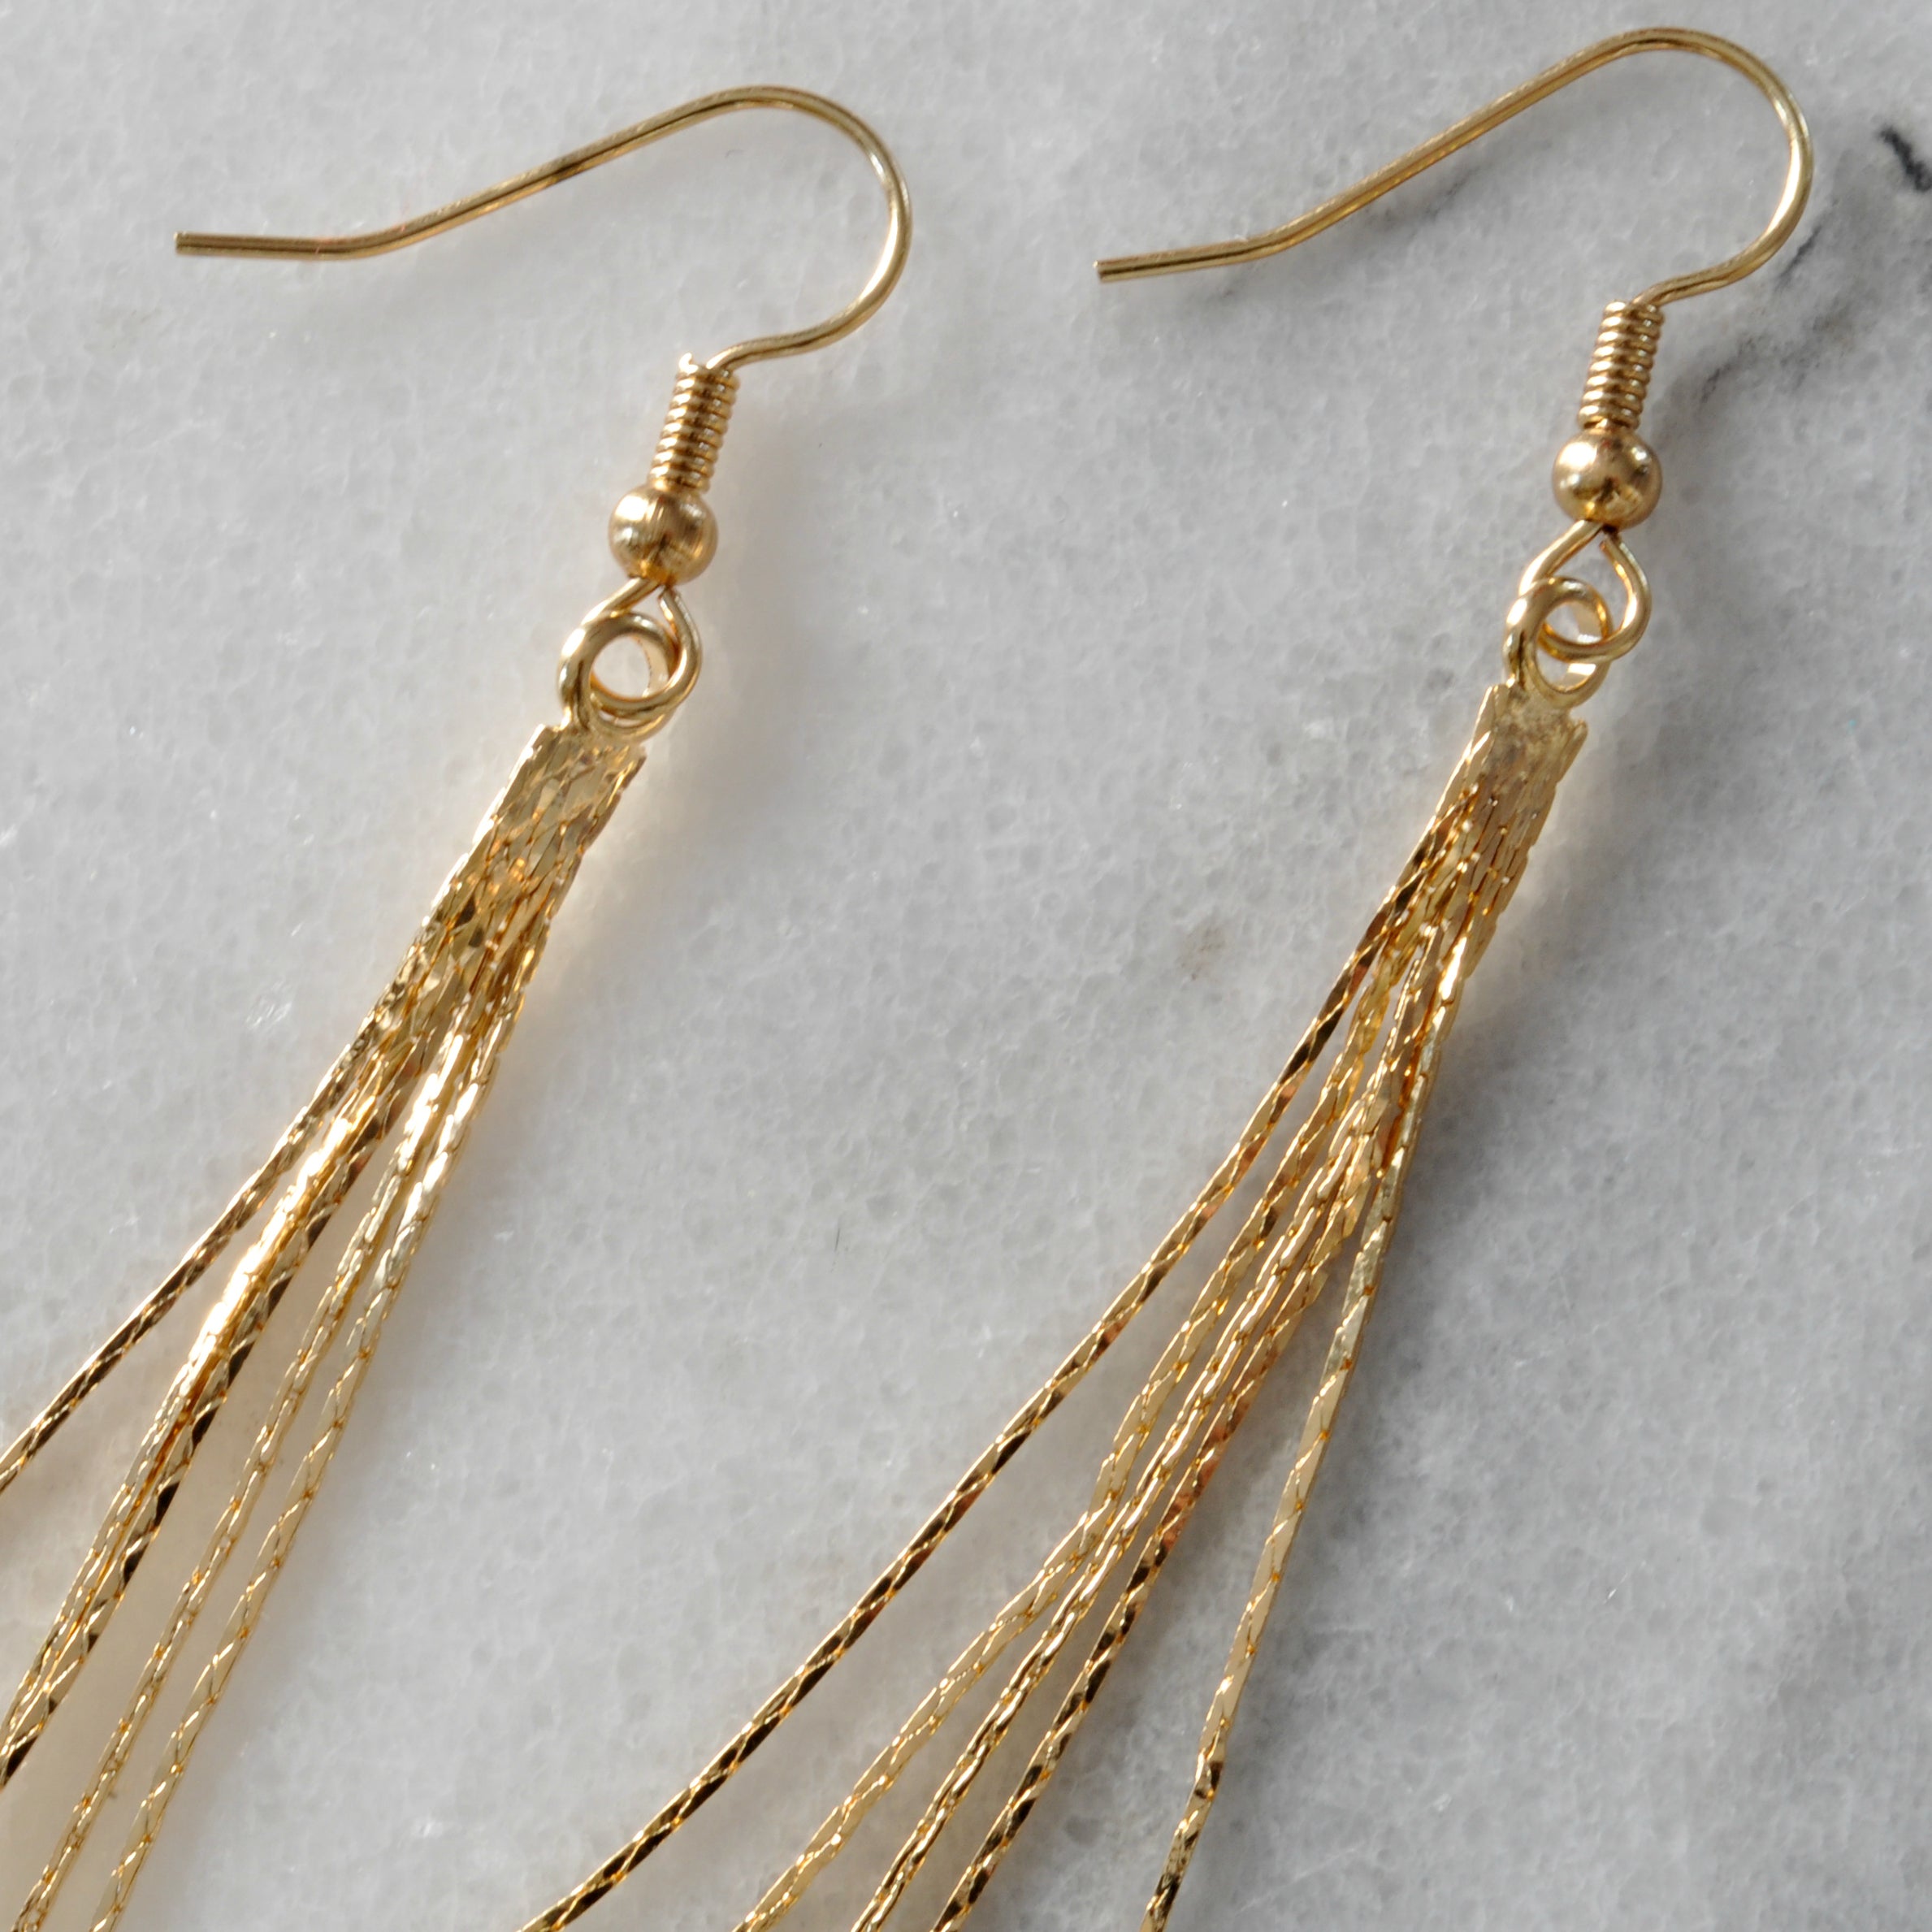 Gold Chain Earrings  Handmade by Libby & Smee